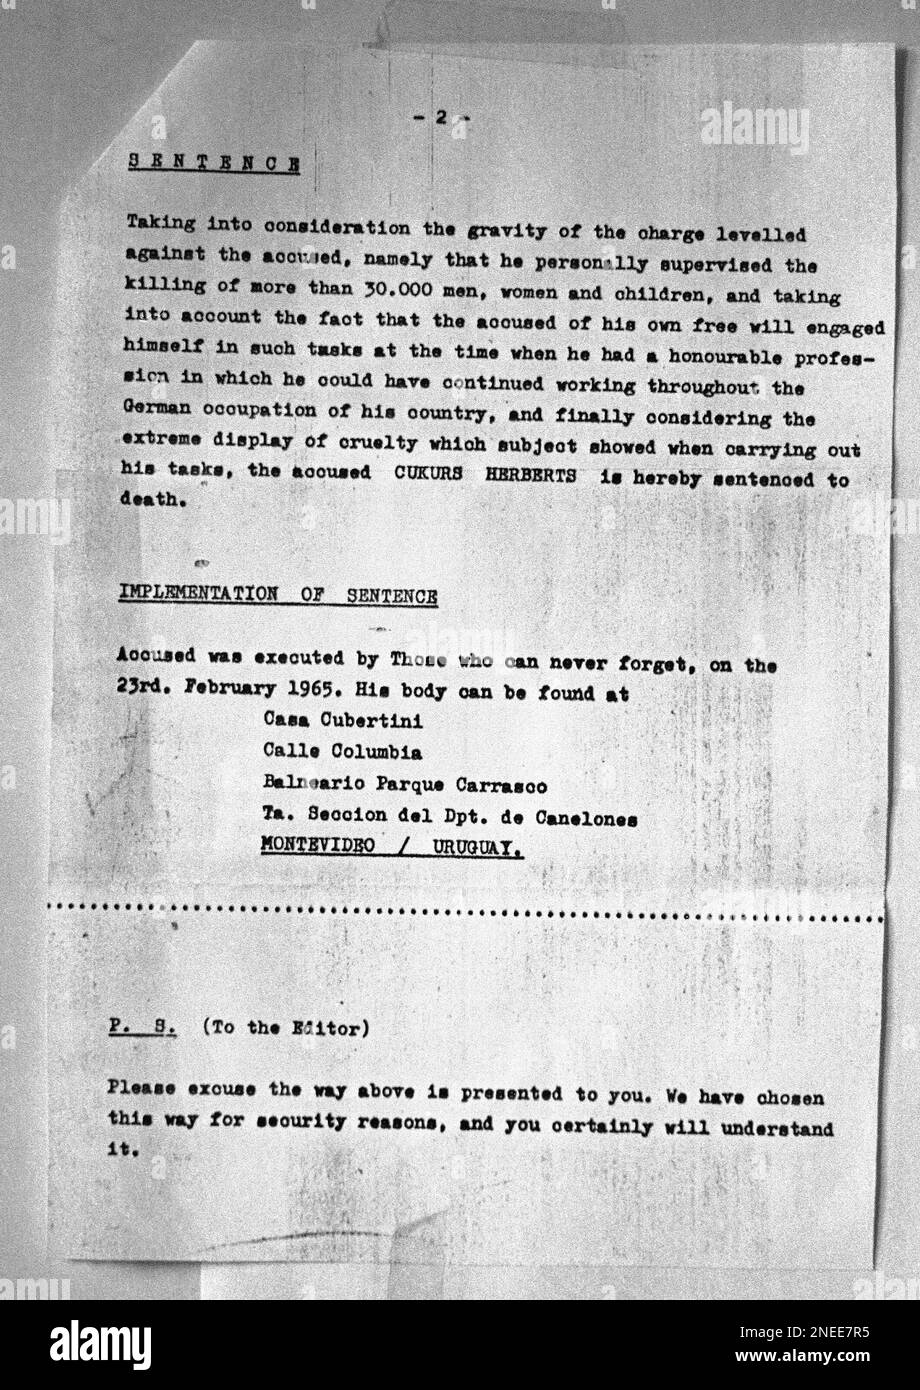 This is the second page of a letter written to the AP bureau in Bonn, Germany, March 7, 1965, by a group calling them "Those who can never forget." It claims to have executed Herbert Cukurs, a Nazi agent in Latvia during World War II, who personally supervised the killing of more than 30,000 people. The tip in the letter led to finding a body in Montevideo who apparently was Cukurs. (AP Photo) Stock Photo